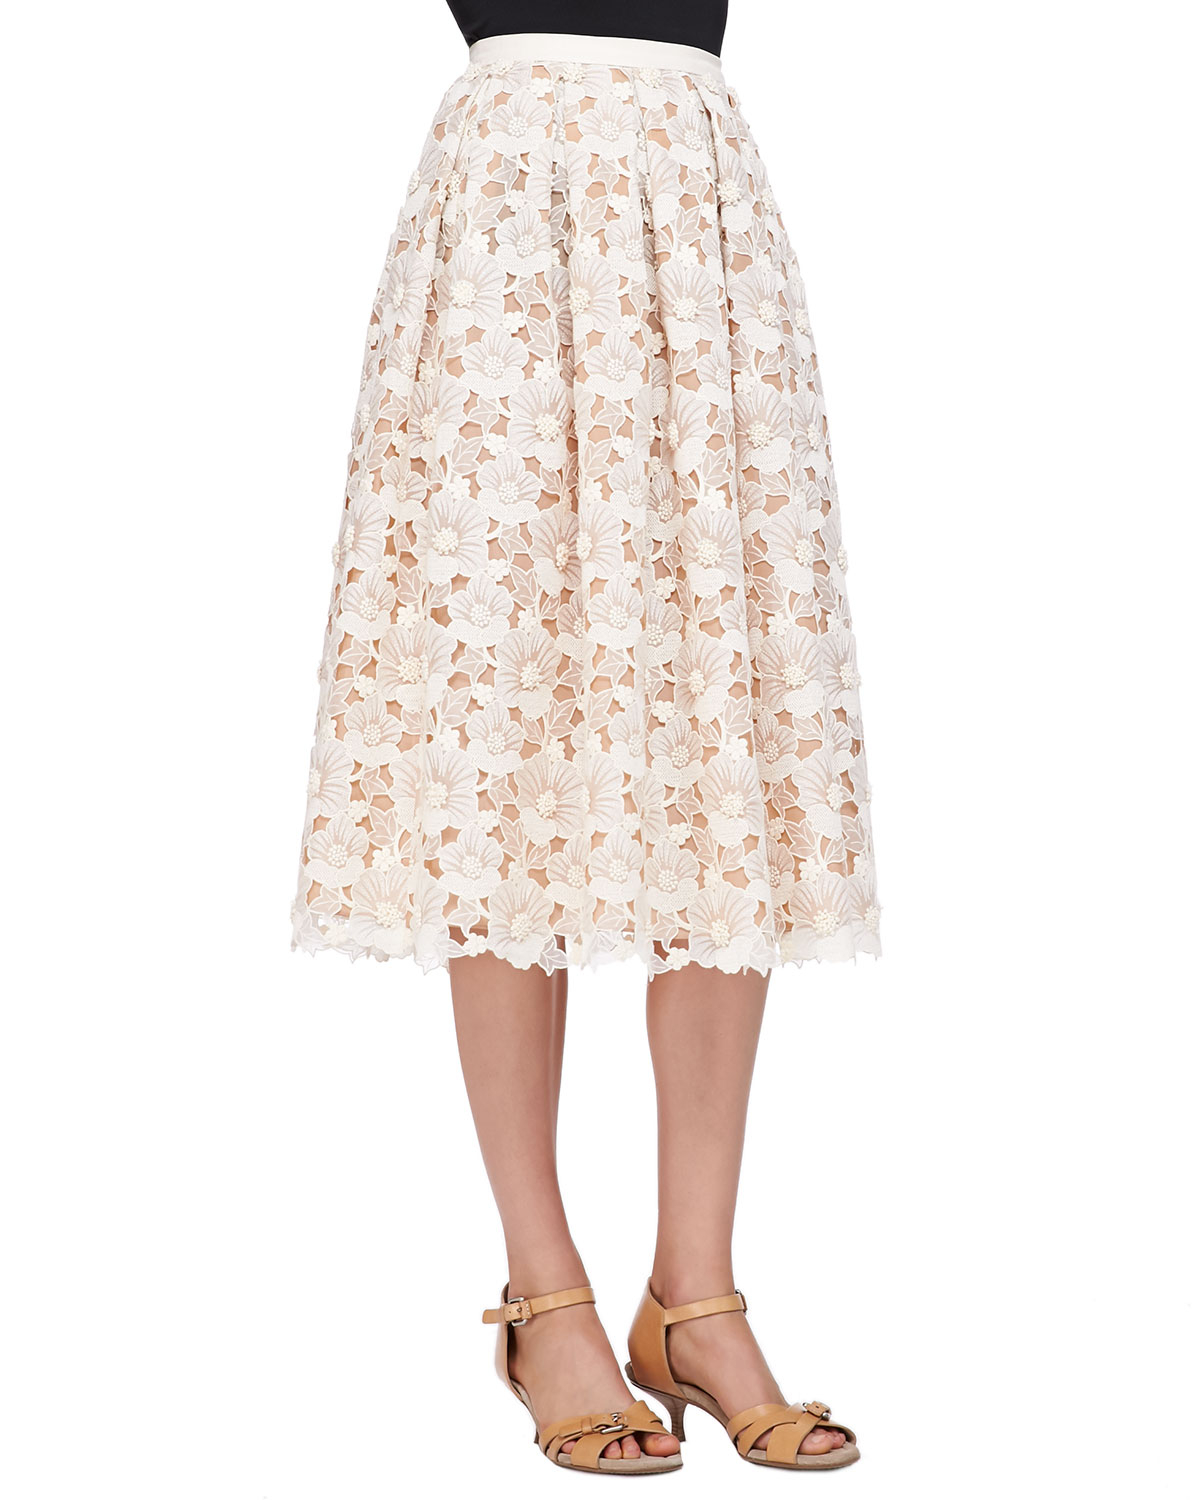 Michael kors Floral Lace Mid-Calf Skirt in Natural | Lyst